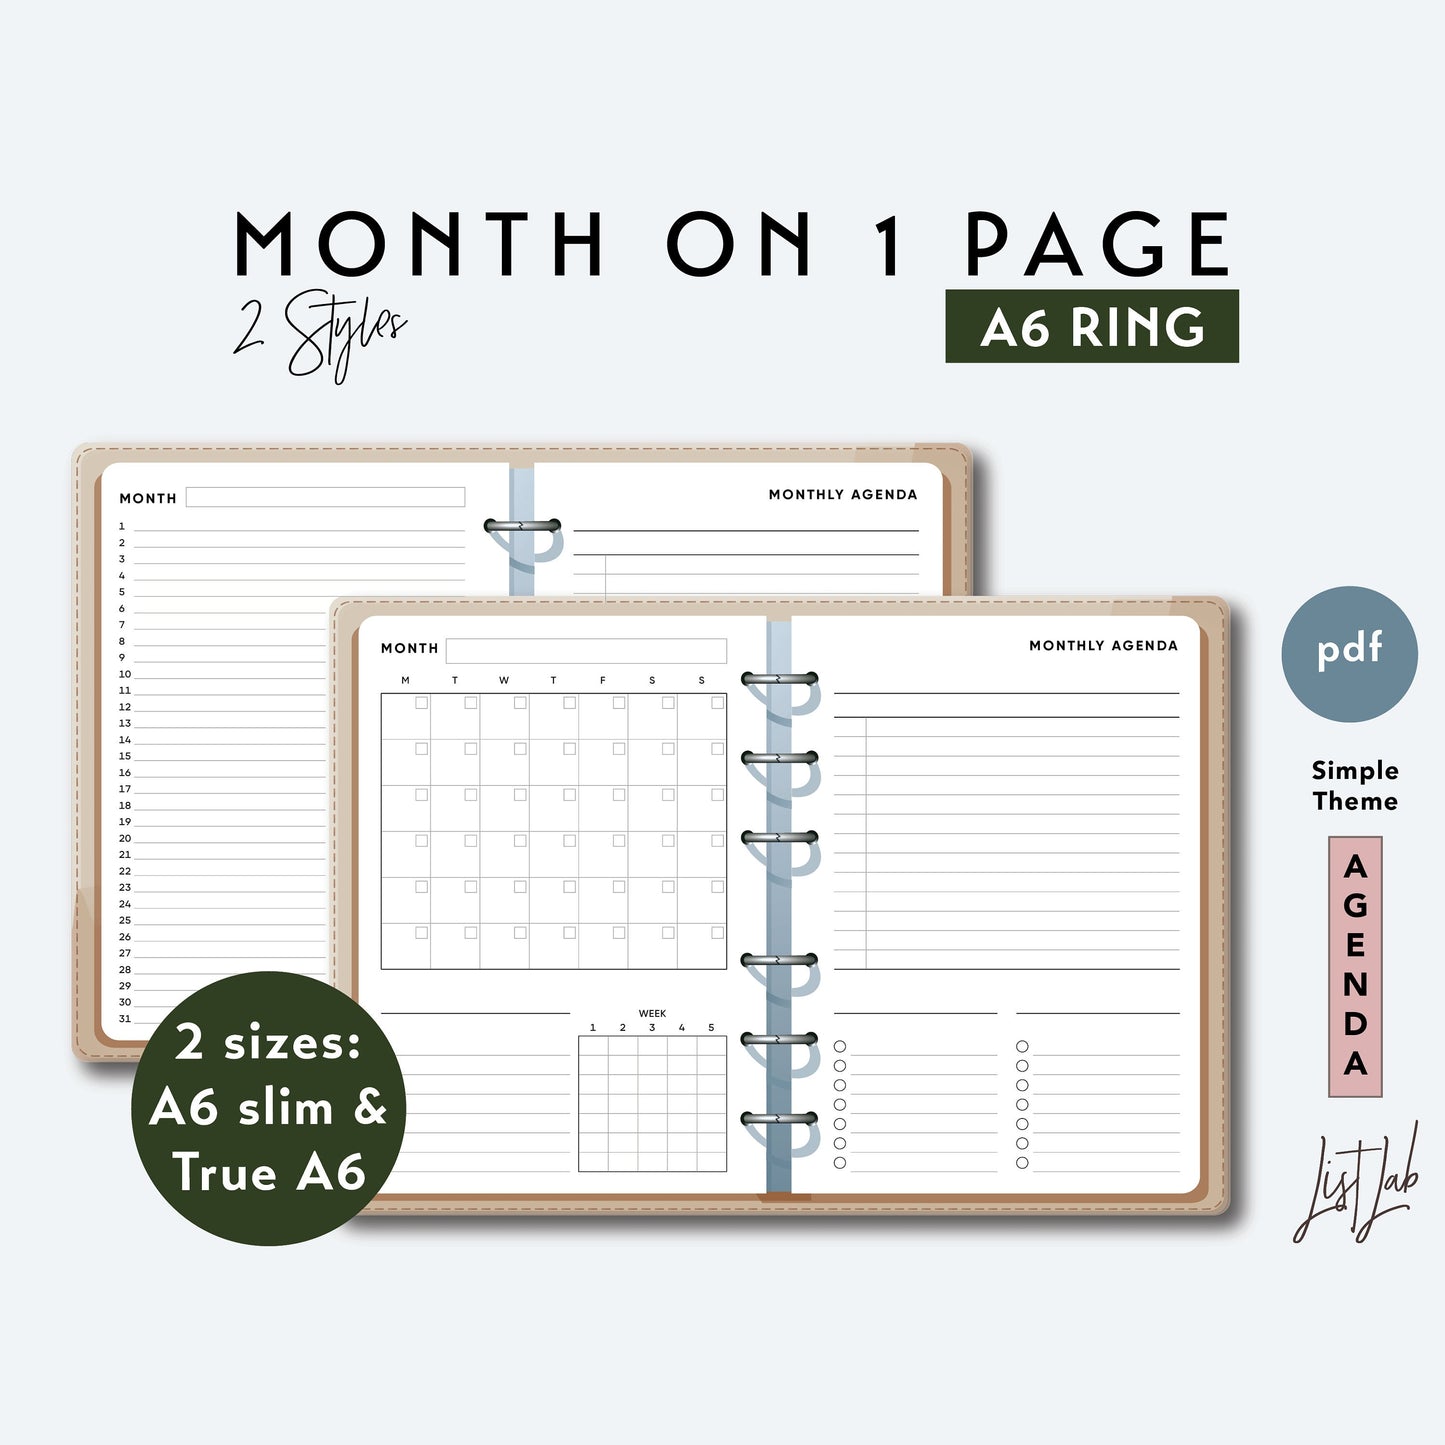 A6 Ring MONTH ON 1 PAGE with Lists and Tracker Printable Set